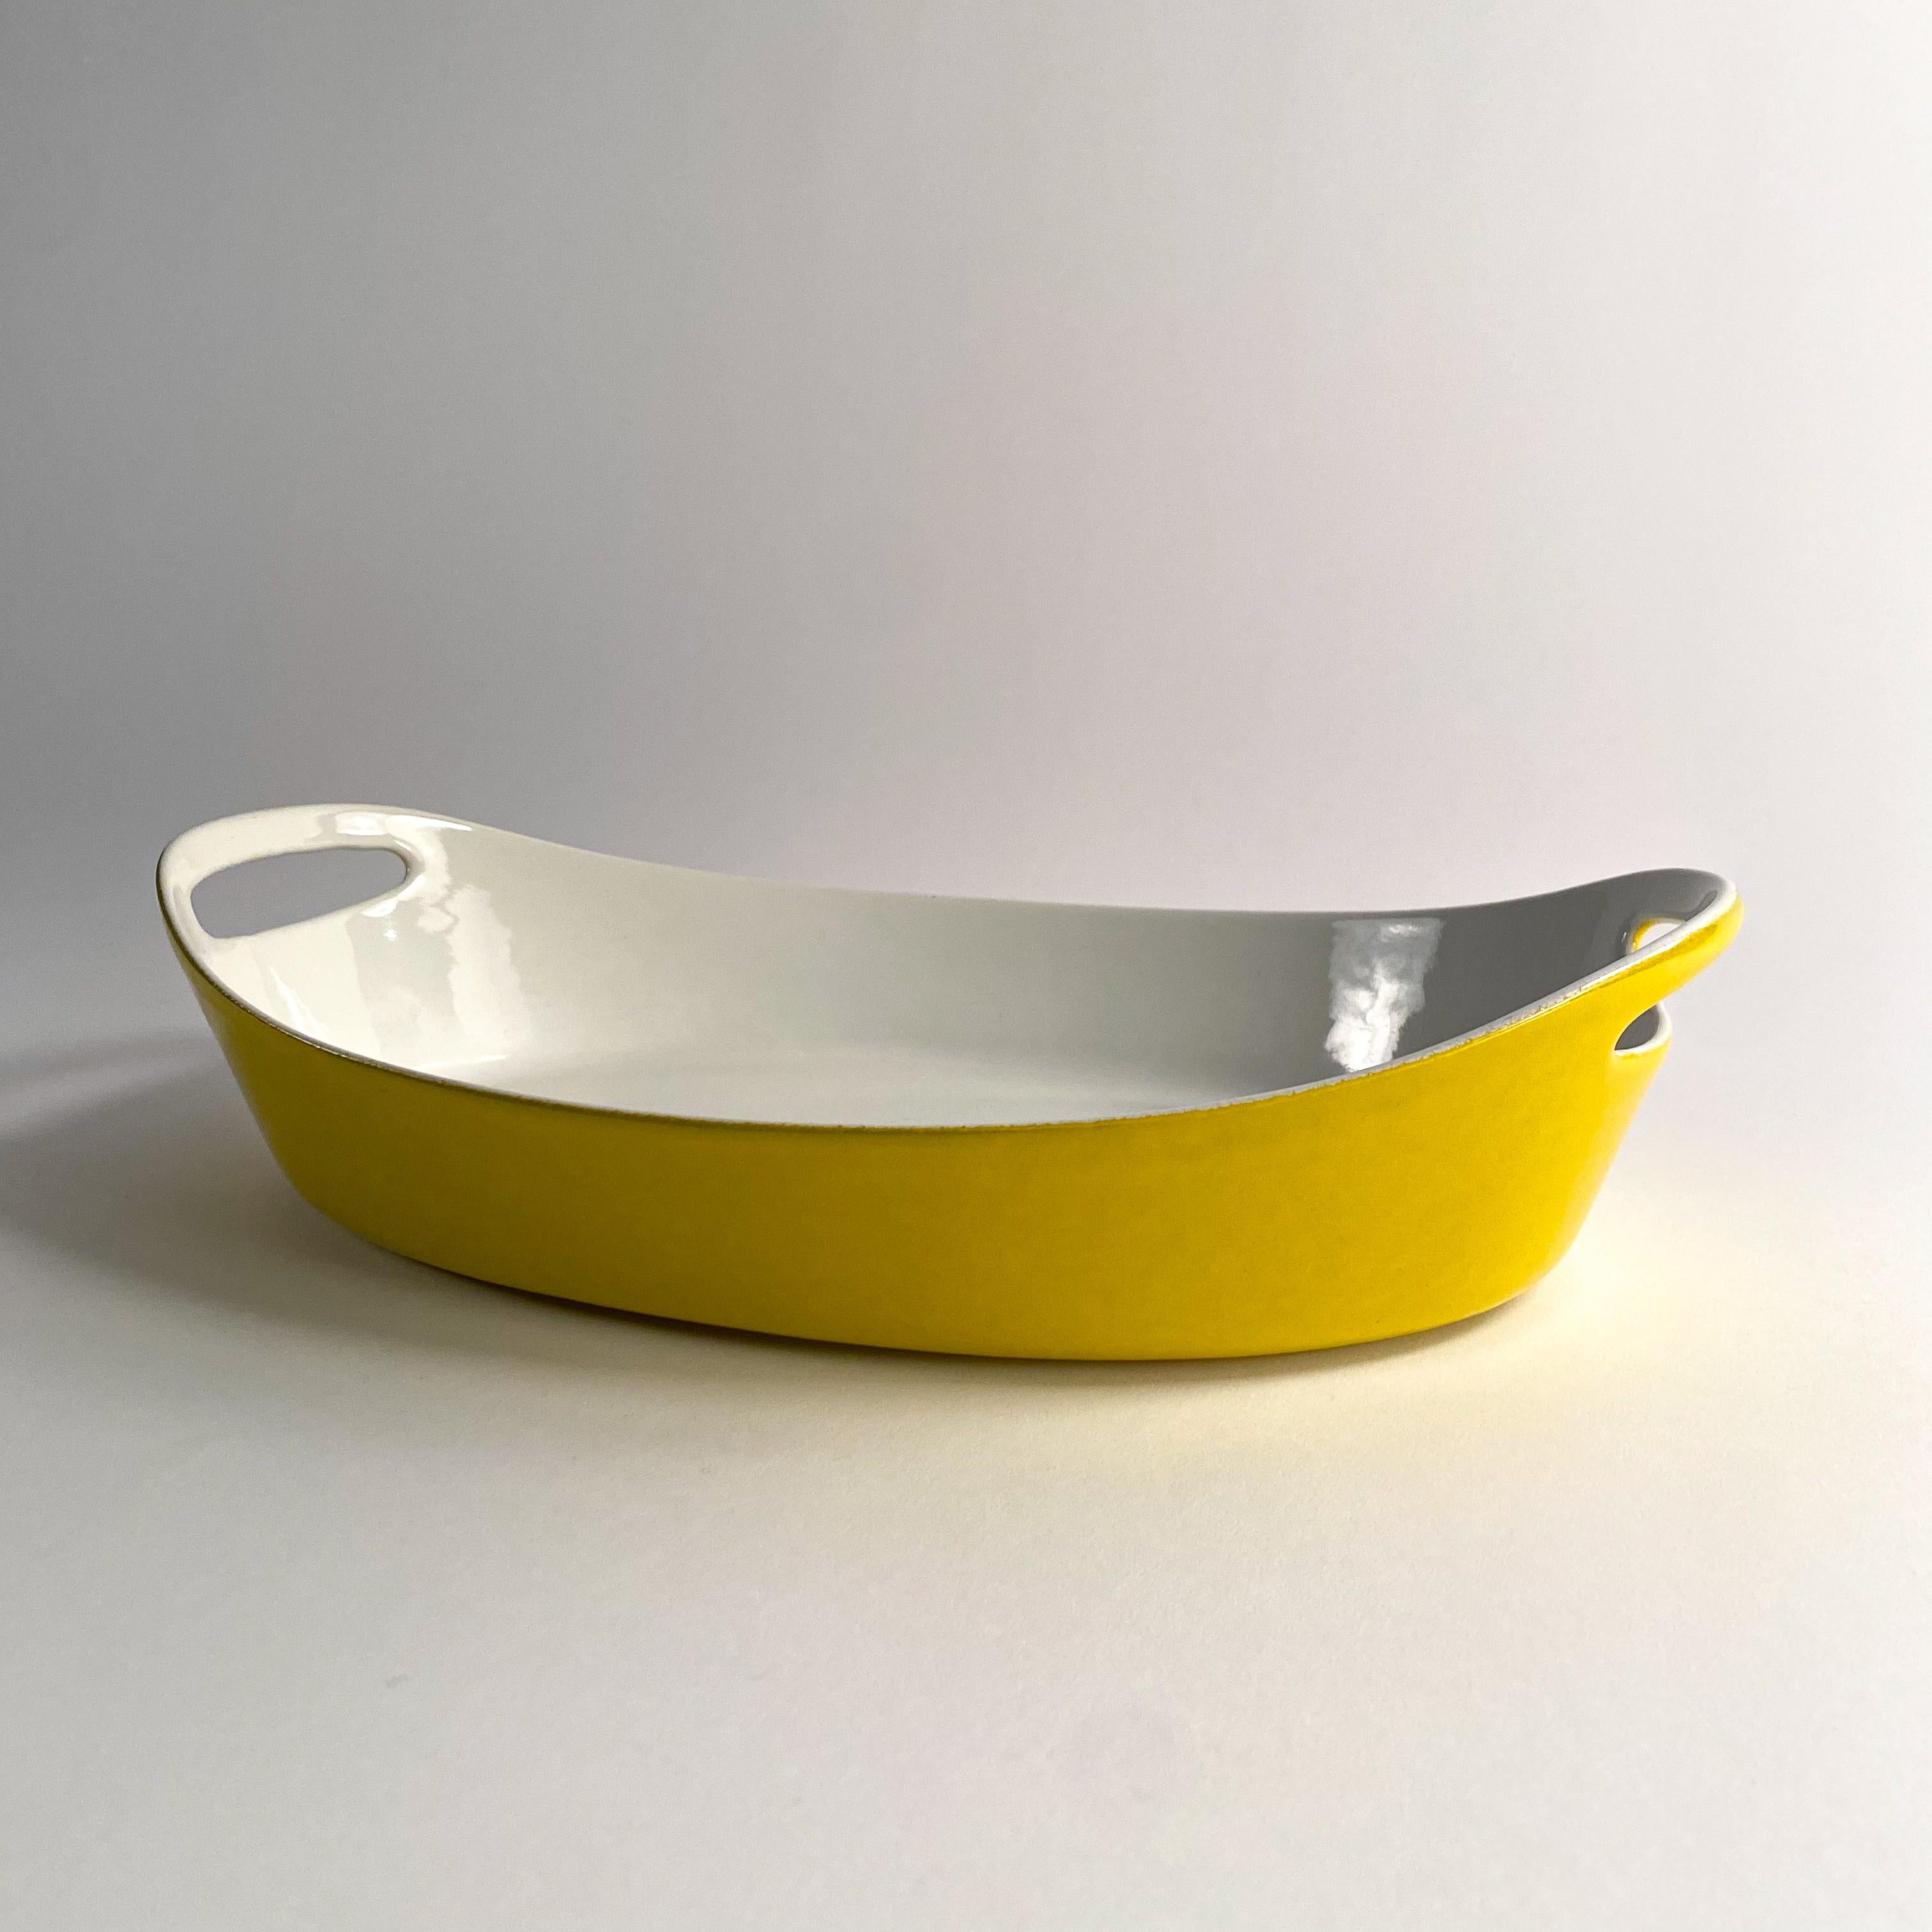 beautiful yellow enameled castiron casserole dish by Michael Lax for Copco. please see photos for condition details. 